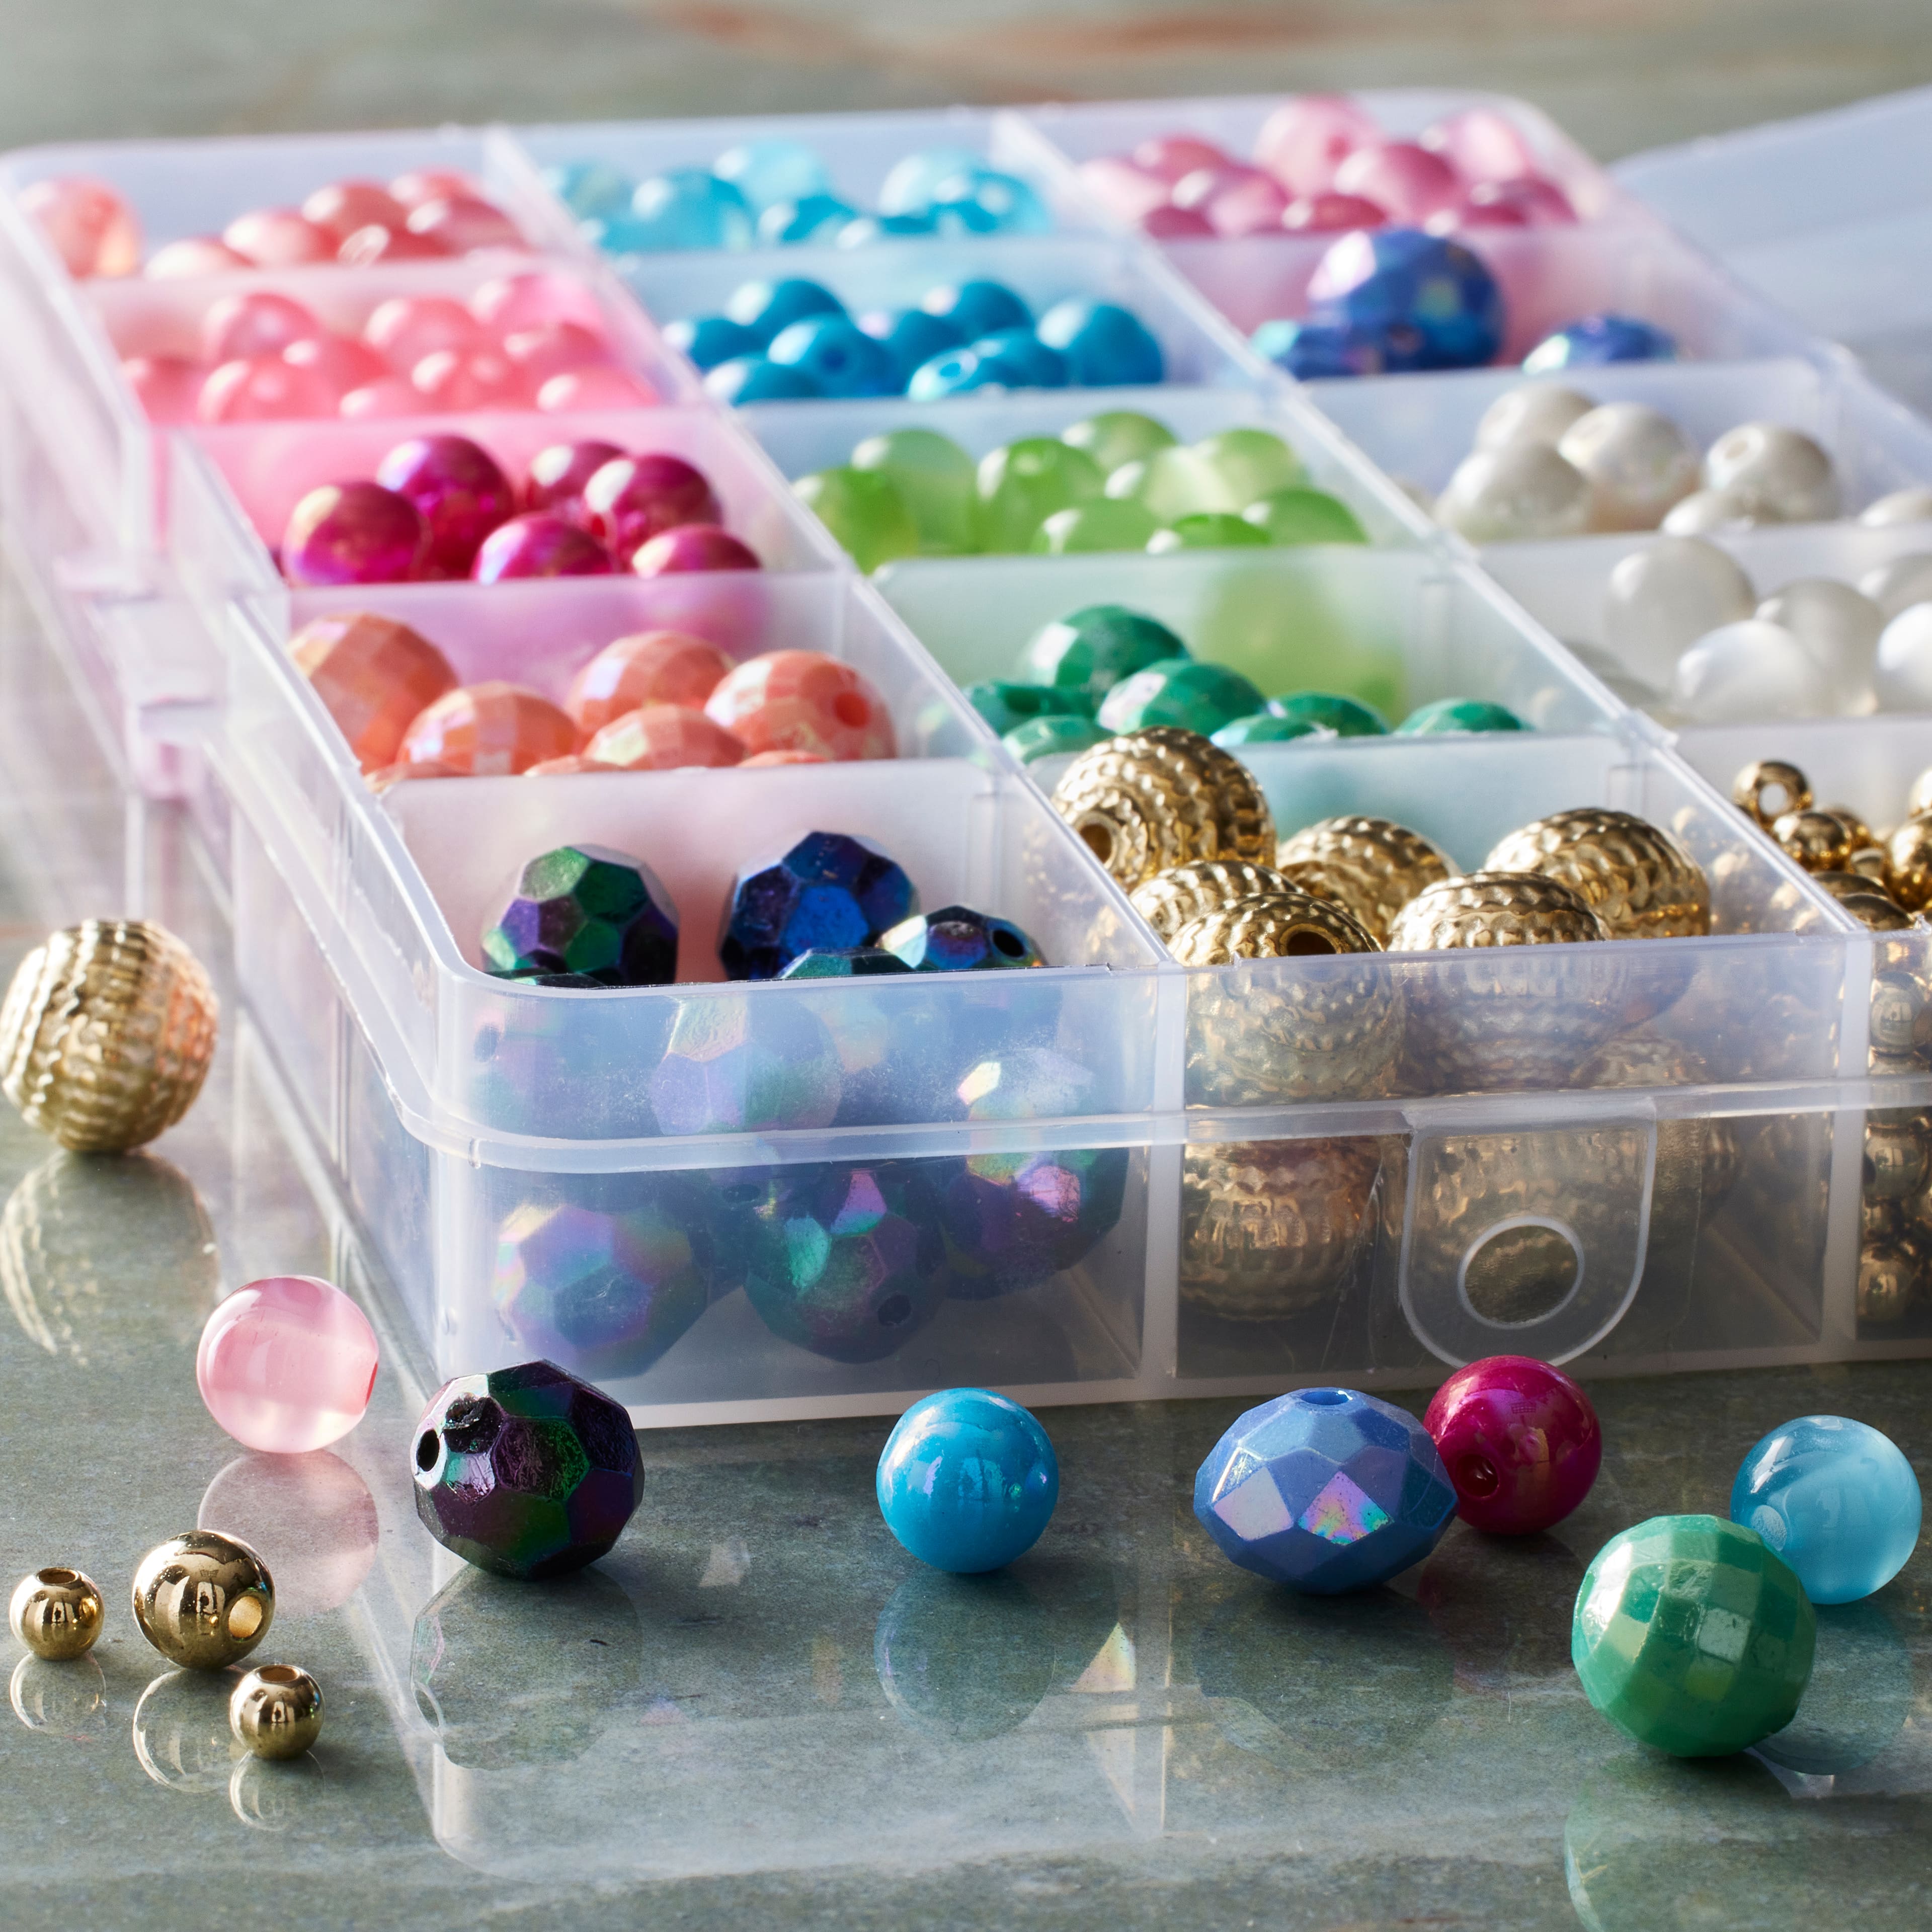 12 Packs: 596 ct. (3,576 total) Mixed Party Craft Beads By Bead Landing&#x2122;